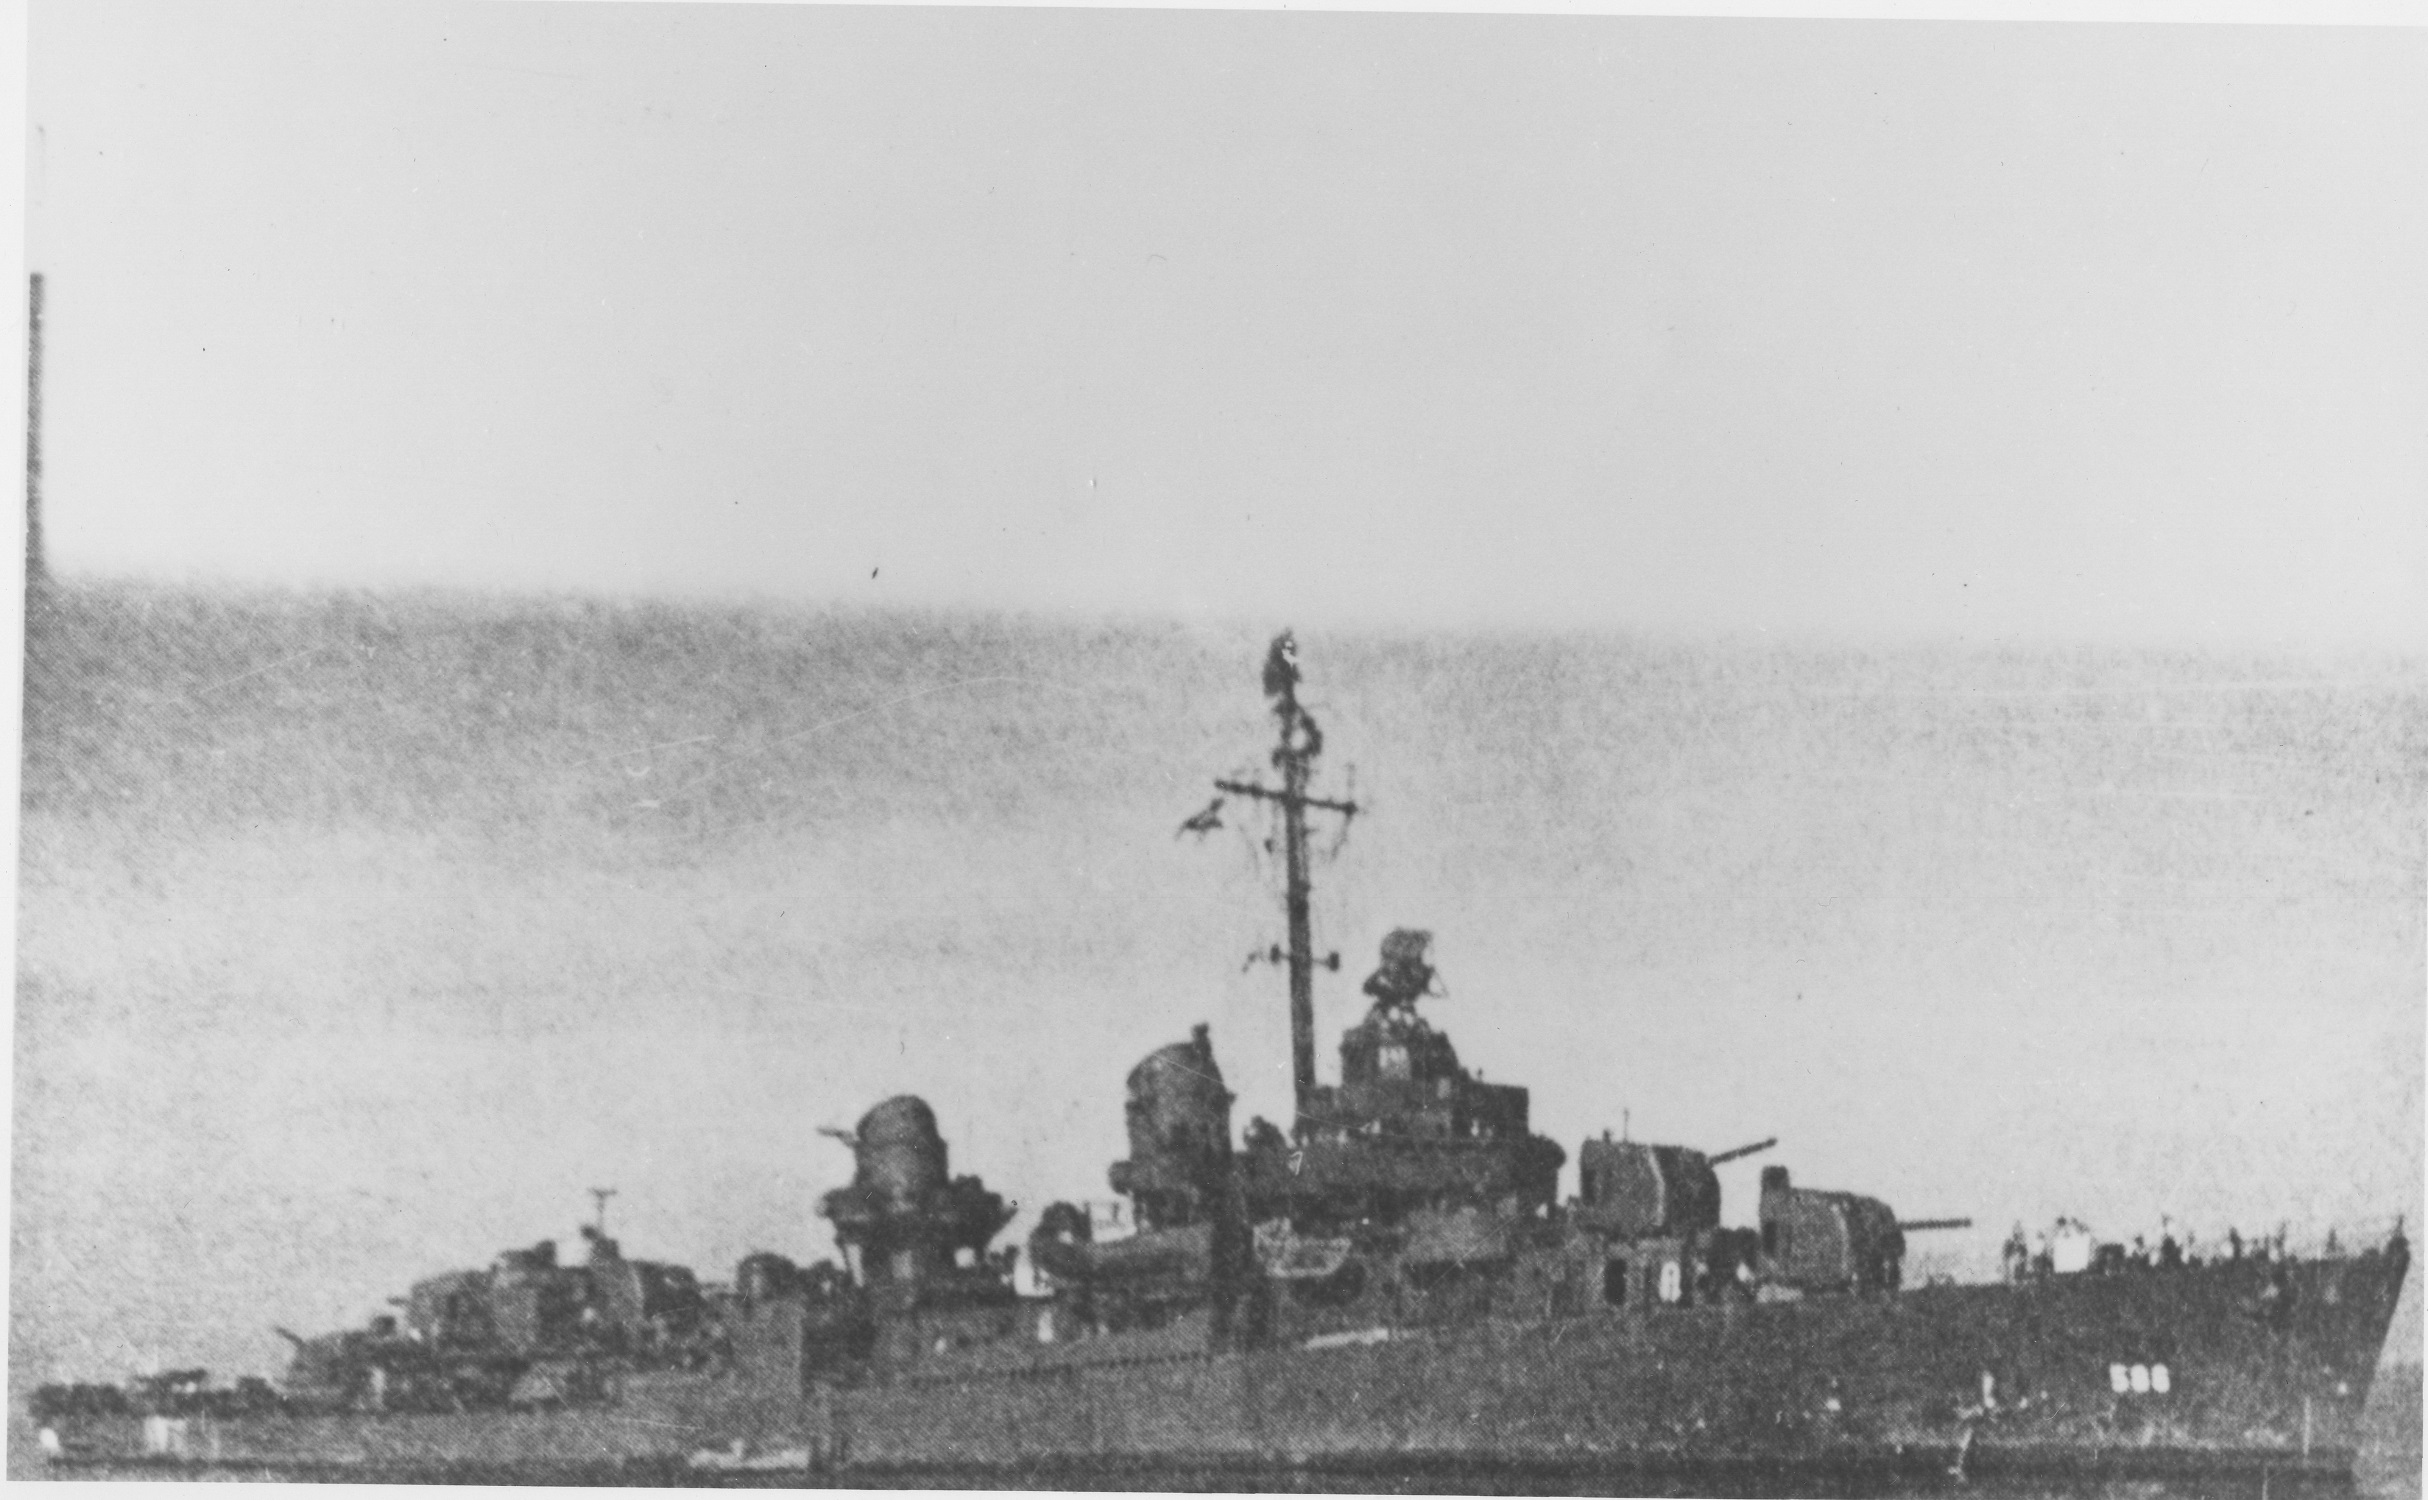 The U.S. Navy honored Frank Newcomb as namesake of the Fletcher-Class destroyer, USS Newcomb. The destroyer enjoyed a very active operational career in World War II. During the 1945 Okinawa campaign, the ship suffered several kamikaze strikes; however, the crew kept the ship afloat and she survived the war. (U.S. Navy photo)